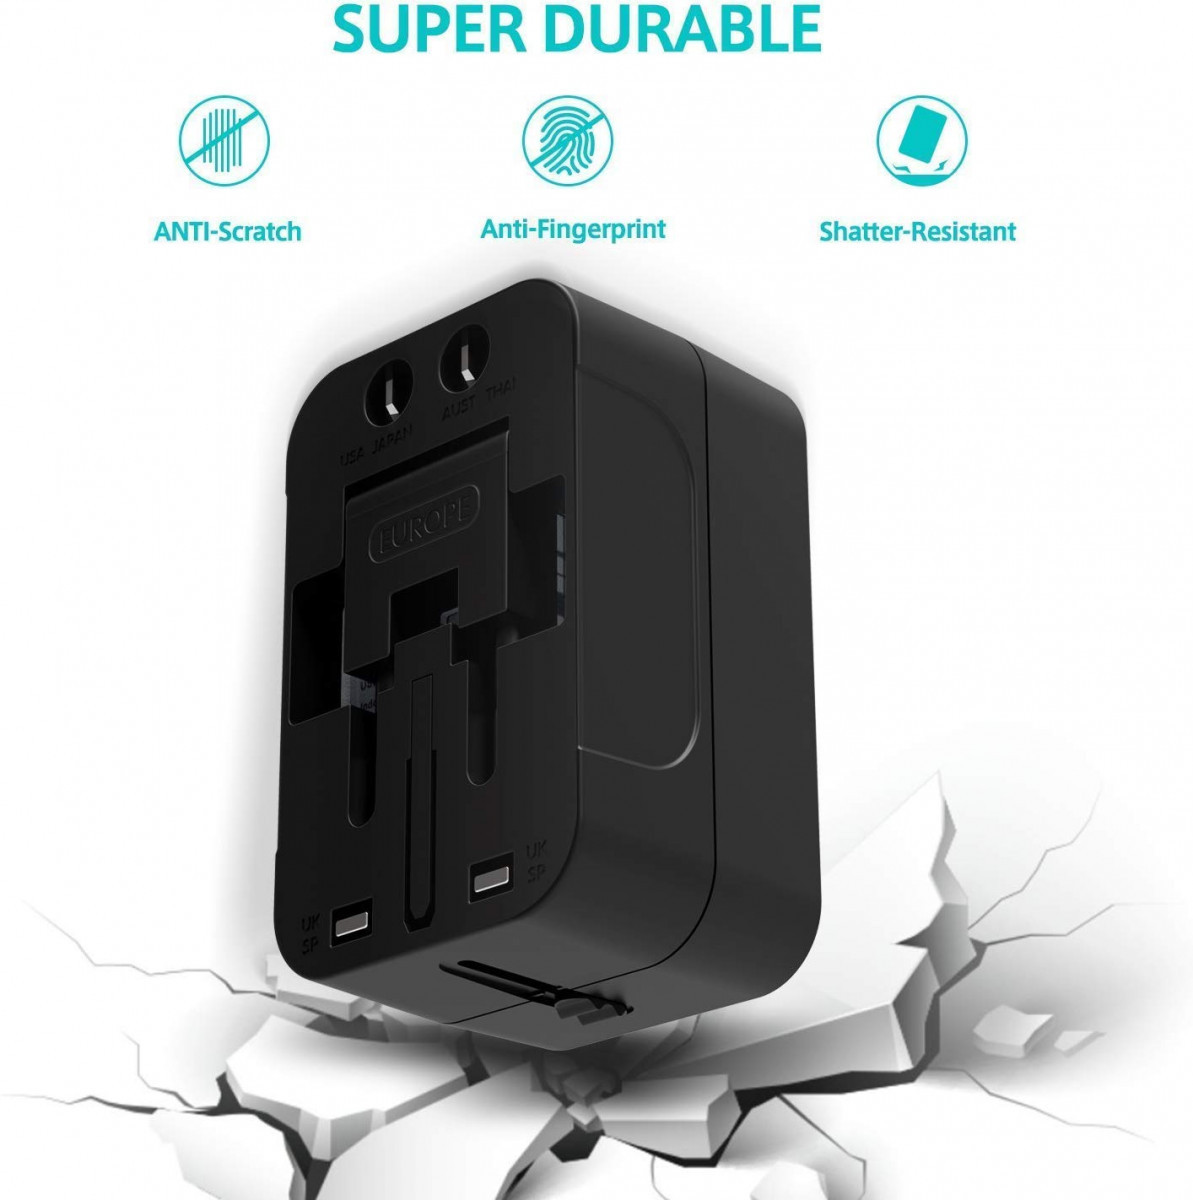 rts Universal Travel Adapter International All in One Worldwide Travel Adapter and Wall Charger with USB Ports with Multi Type Power Outlet USB 21A100-250 Voltage Travel Charger Black